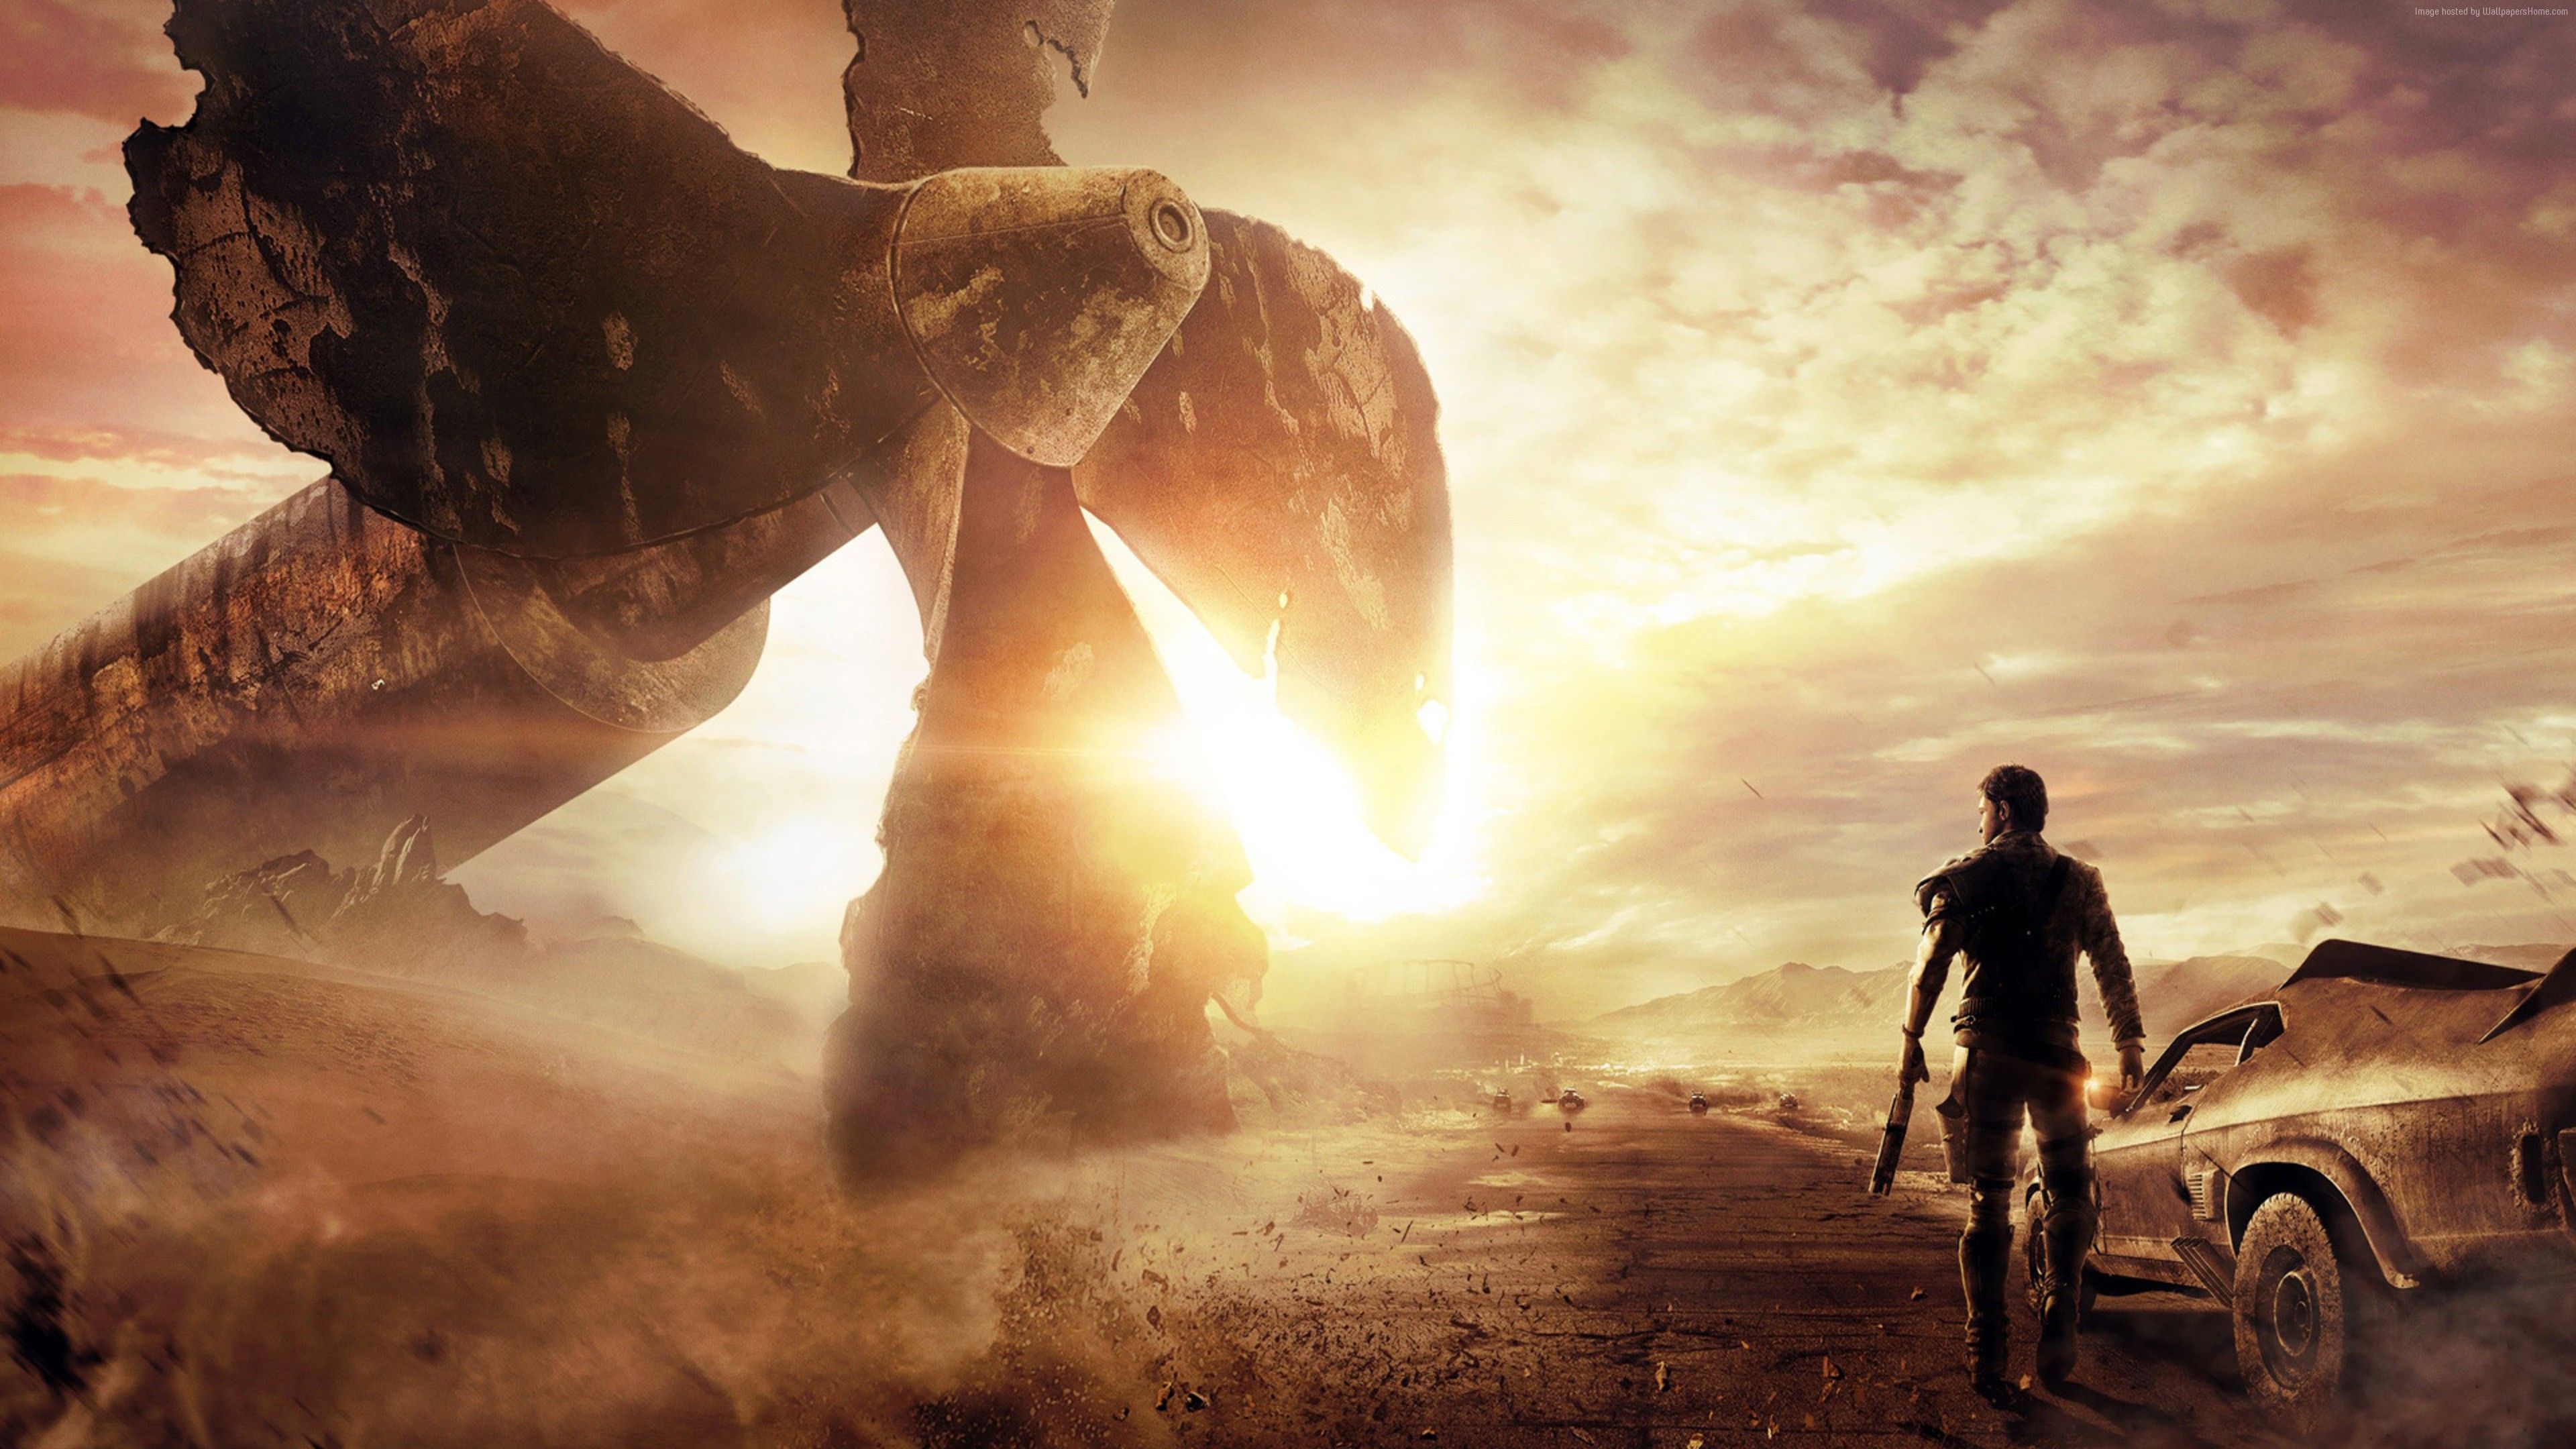 Mad Max Wallpaper, Games / Recent Mad Max, Best Games 2015, game